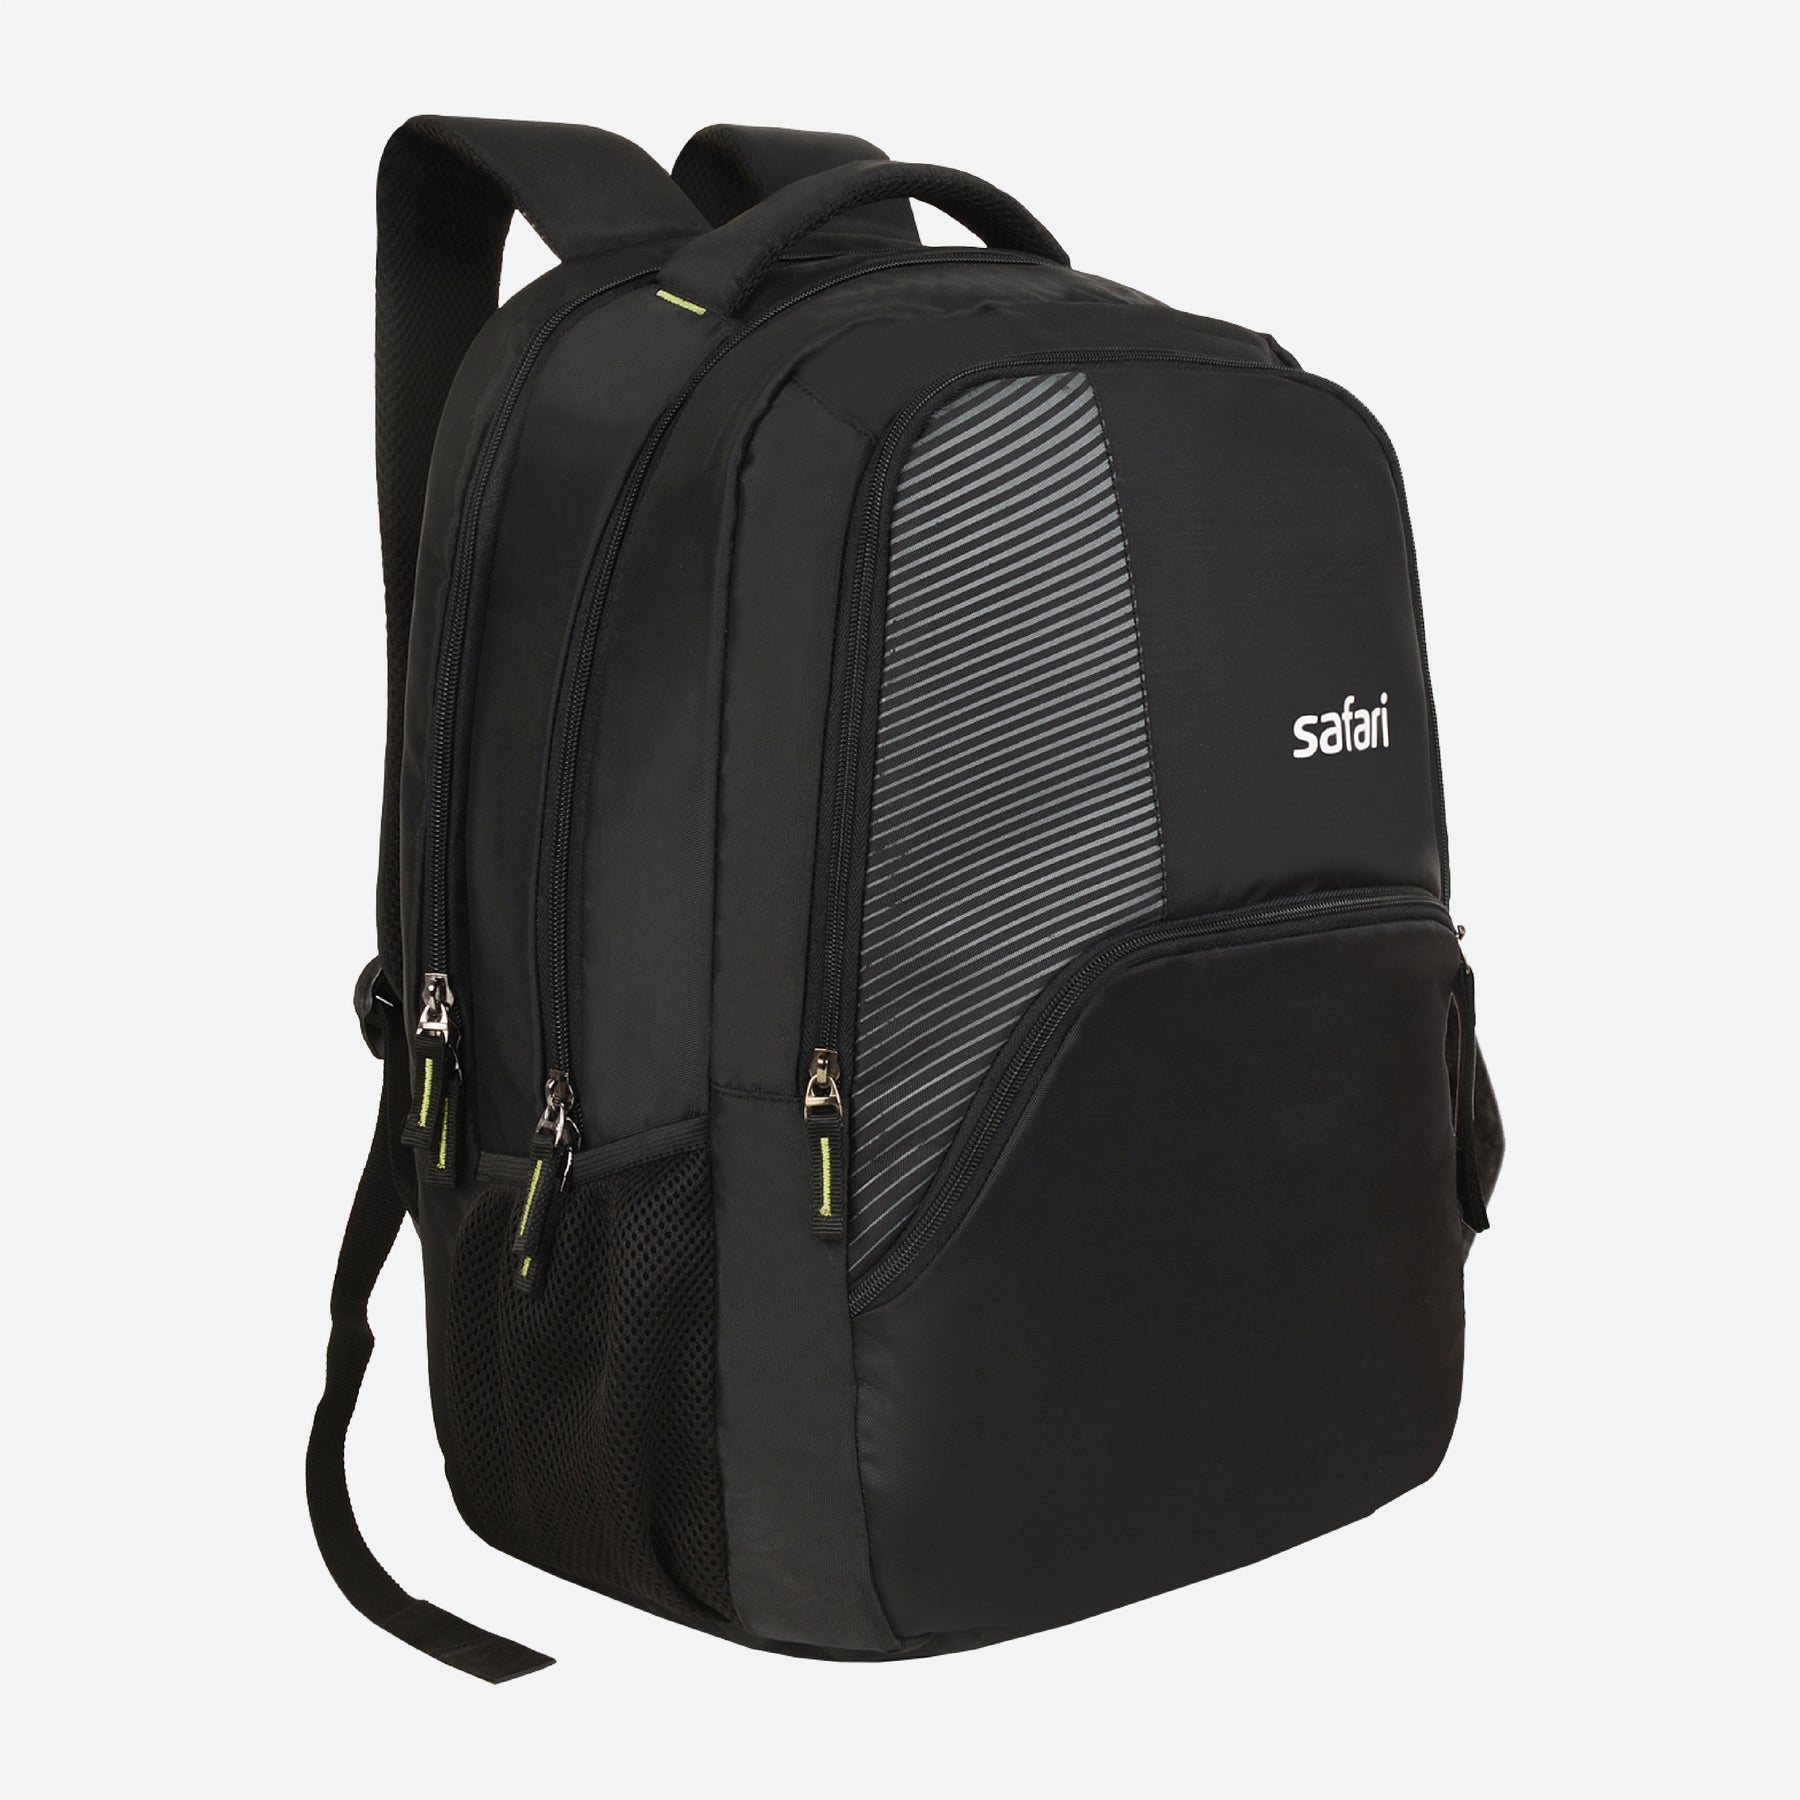 Helix Laptop Backpack with Raincover - Black